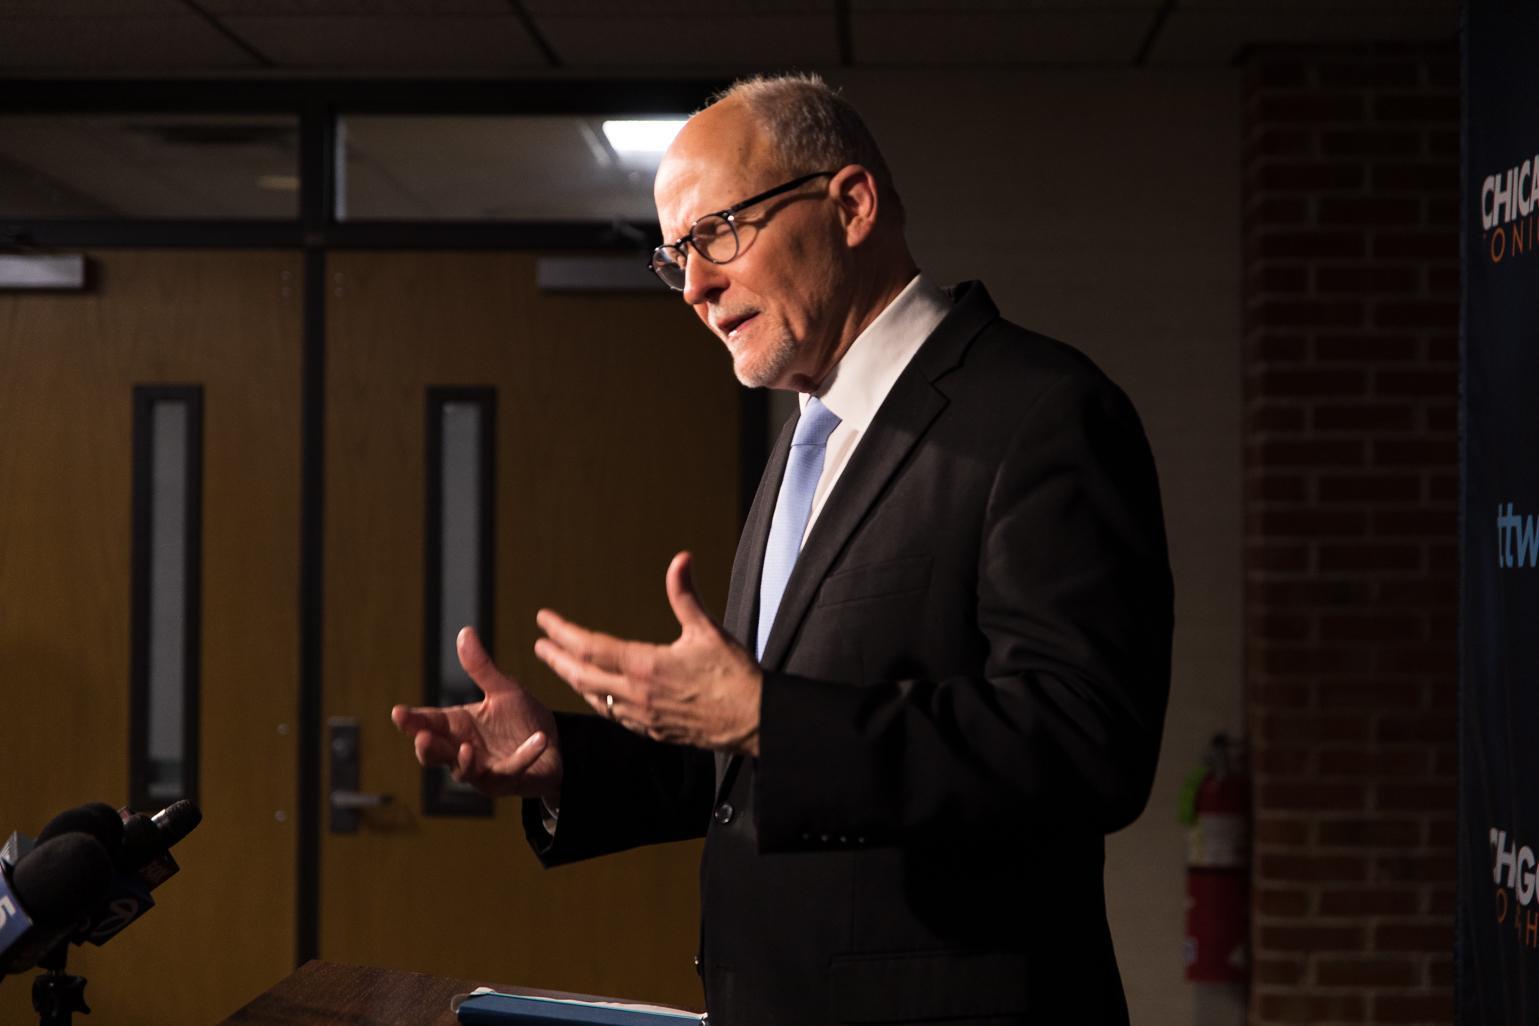 Former CPS CEO Paul Vallas, a candidate for Chicago mayor, speaks at a press conference after the WTTW News Mayoral Forum on Feb. 7, 2023. (Michael Izquierdo / WTTW News)